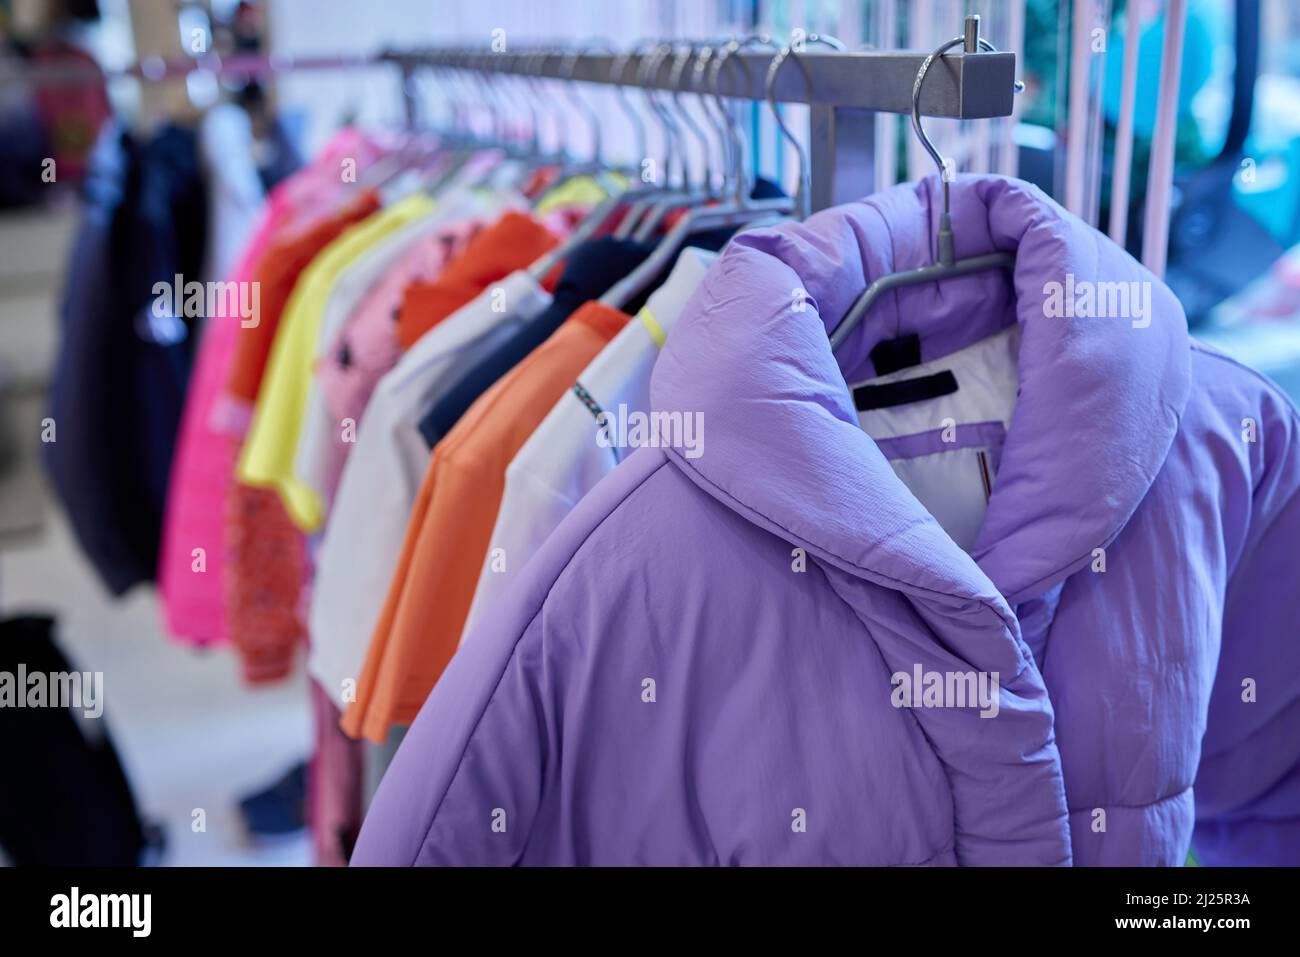 Fashion clothes on clothing rack, Bright colorful cotton shirts on hanger in boutique shop Stock Photo